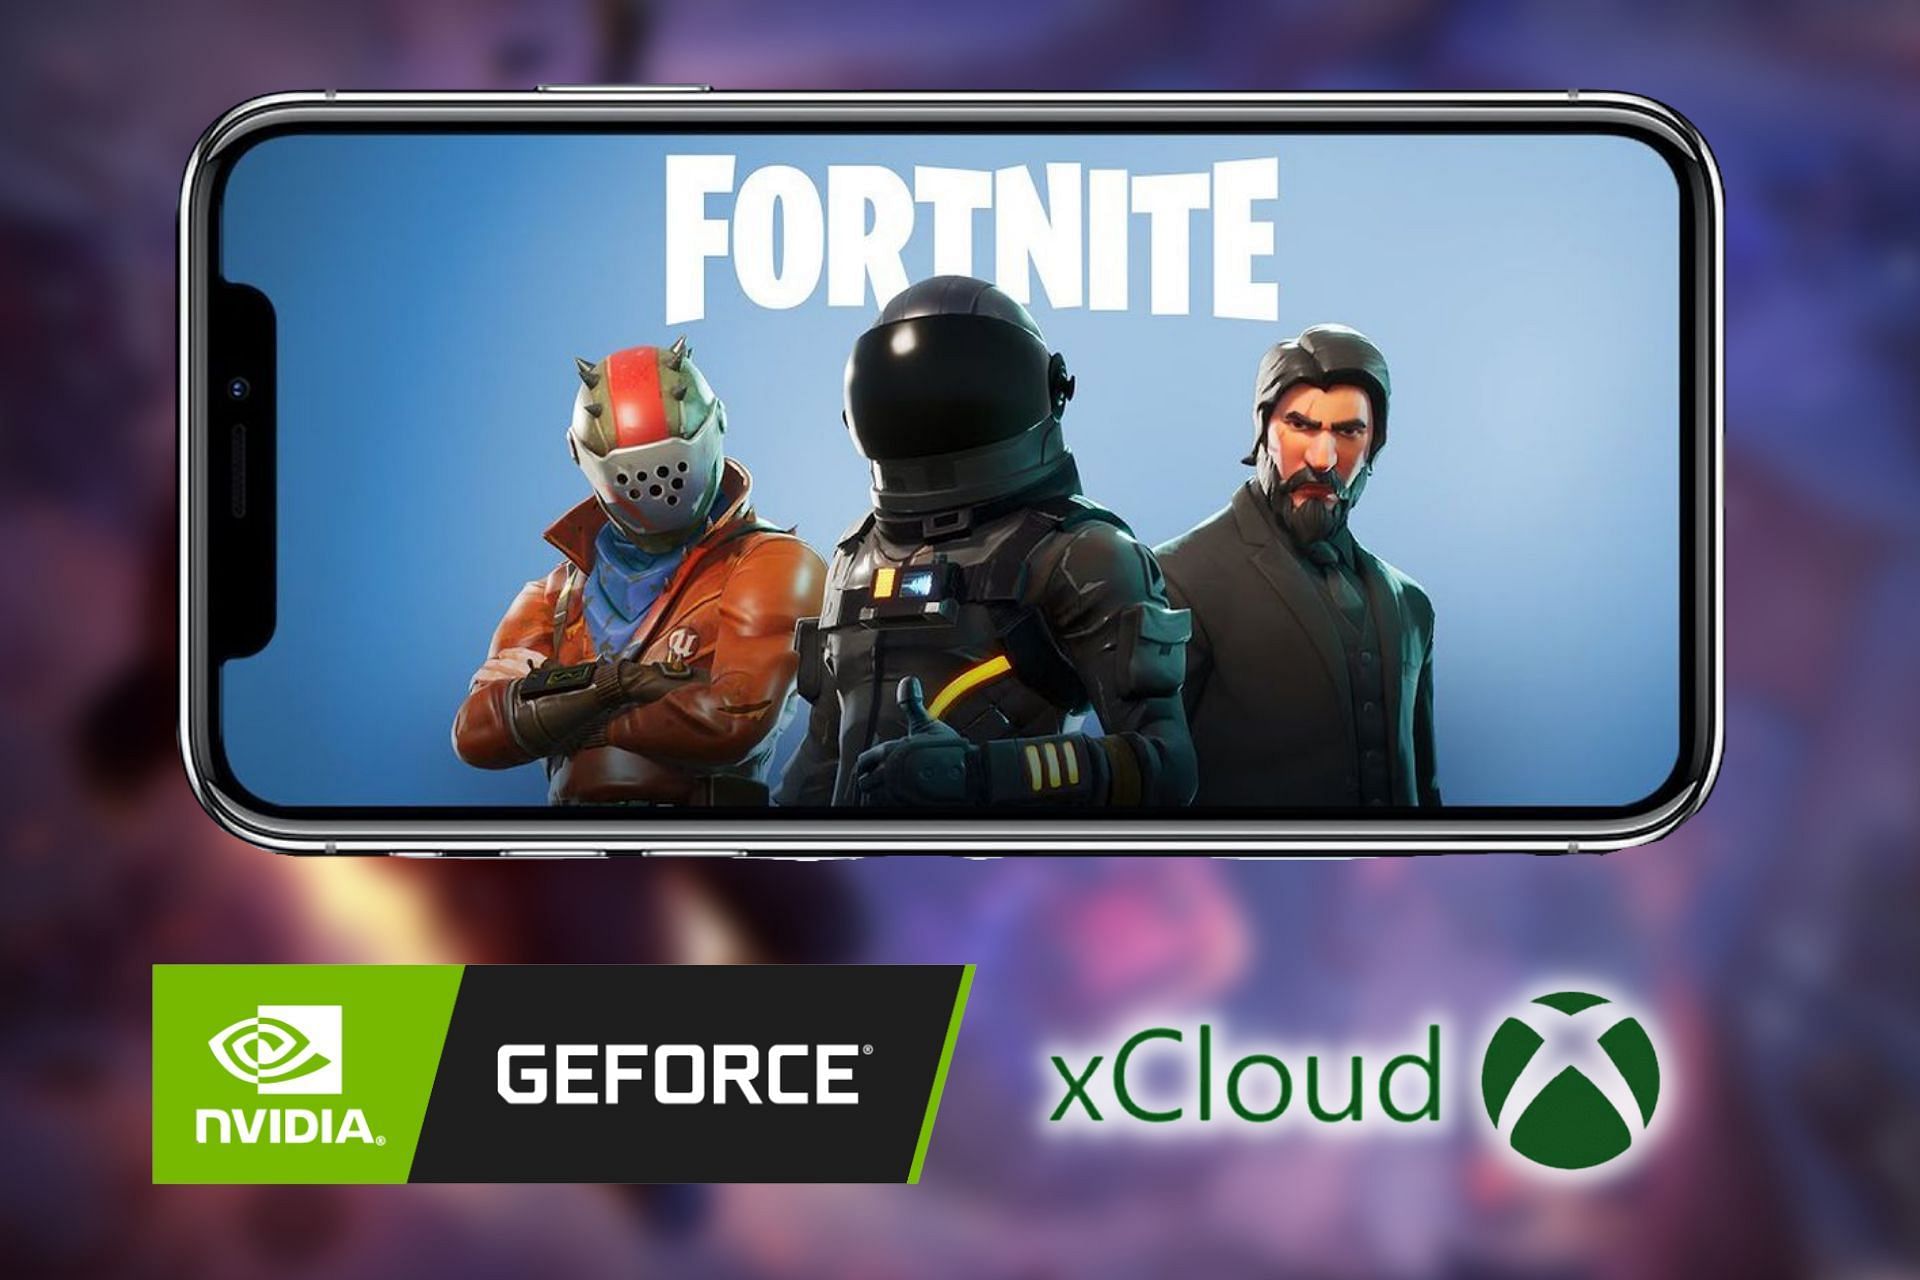 Fortnite on iOS is now available through cloud gaming (Image via Sportskeeda)